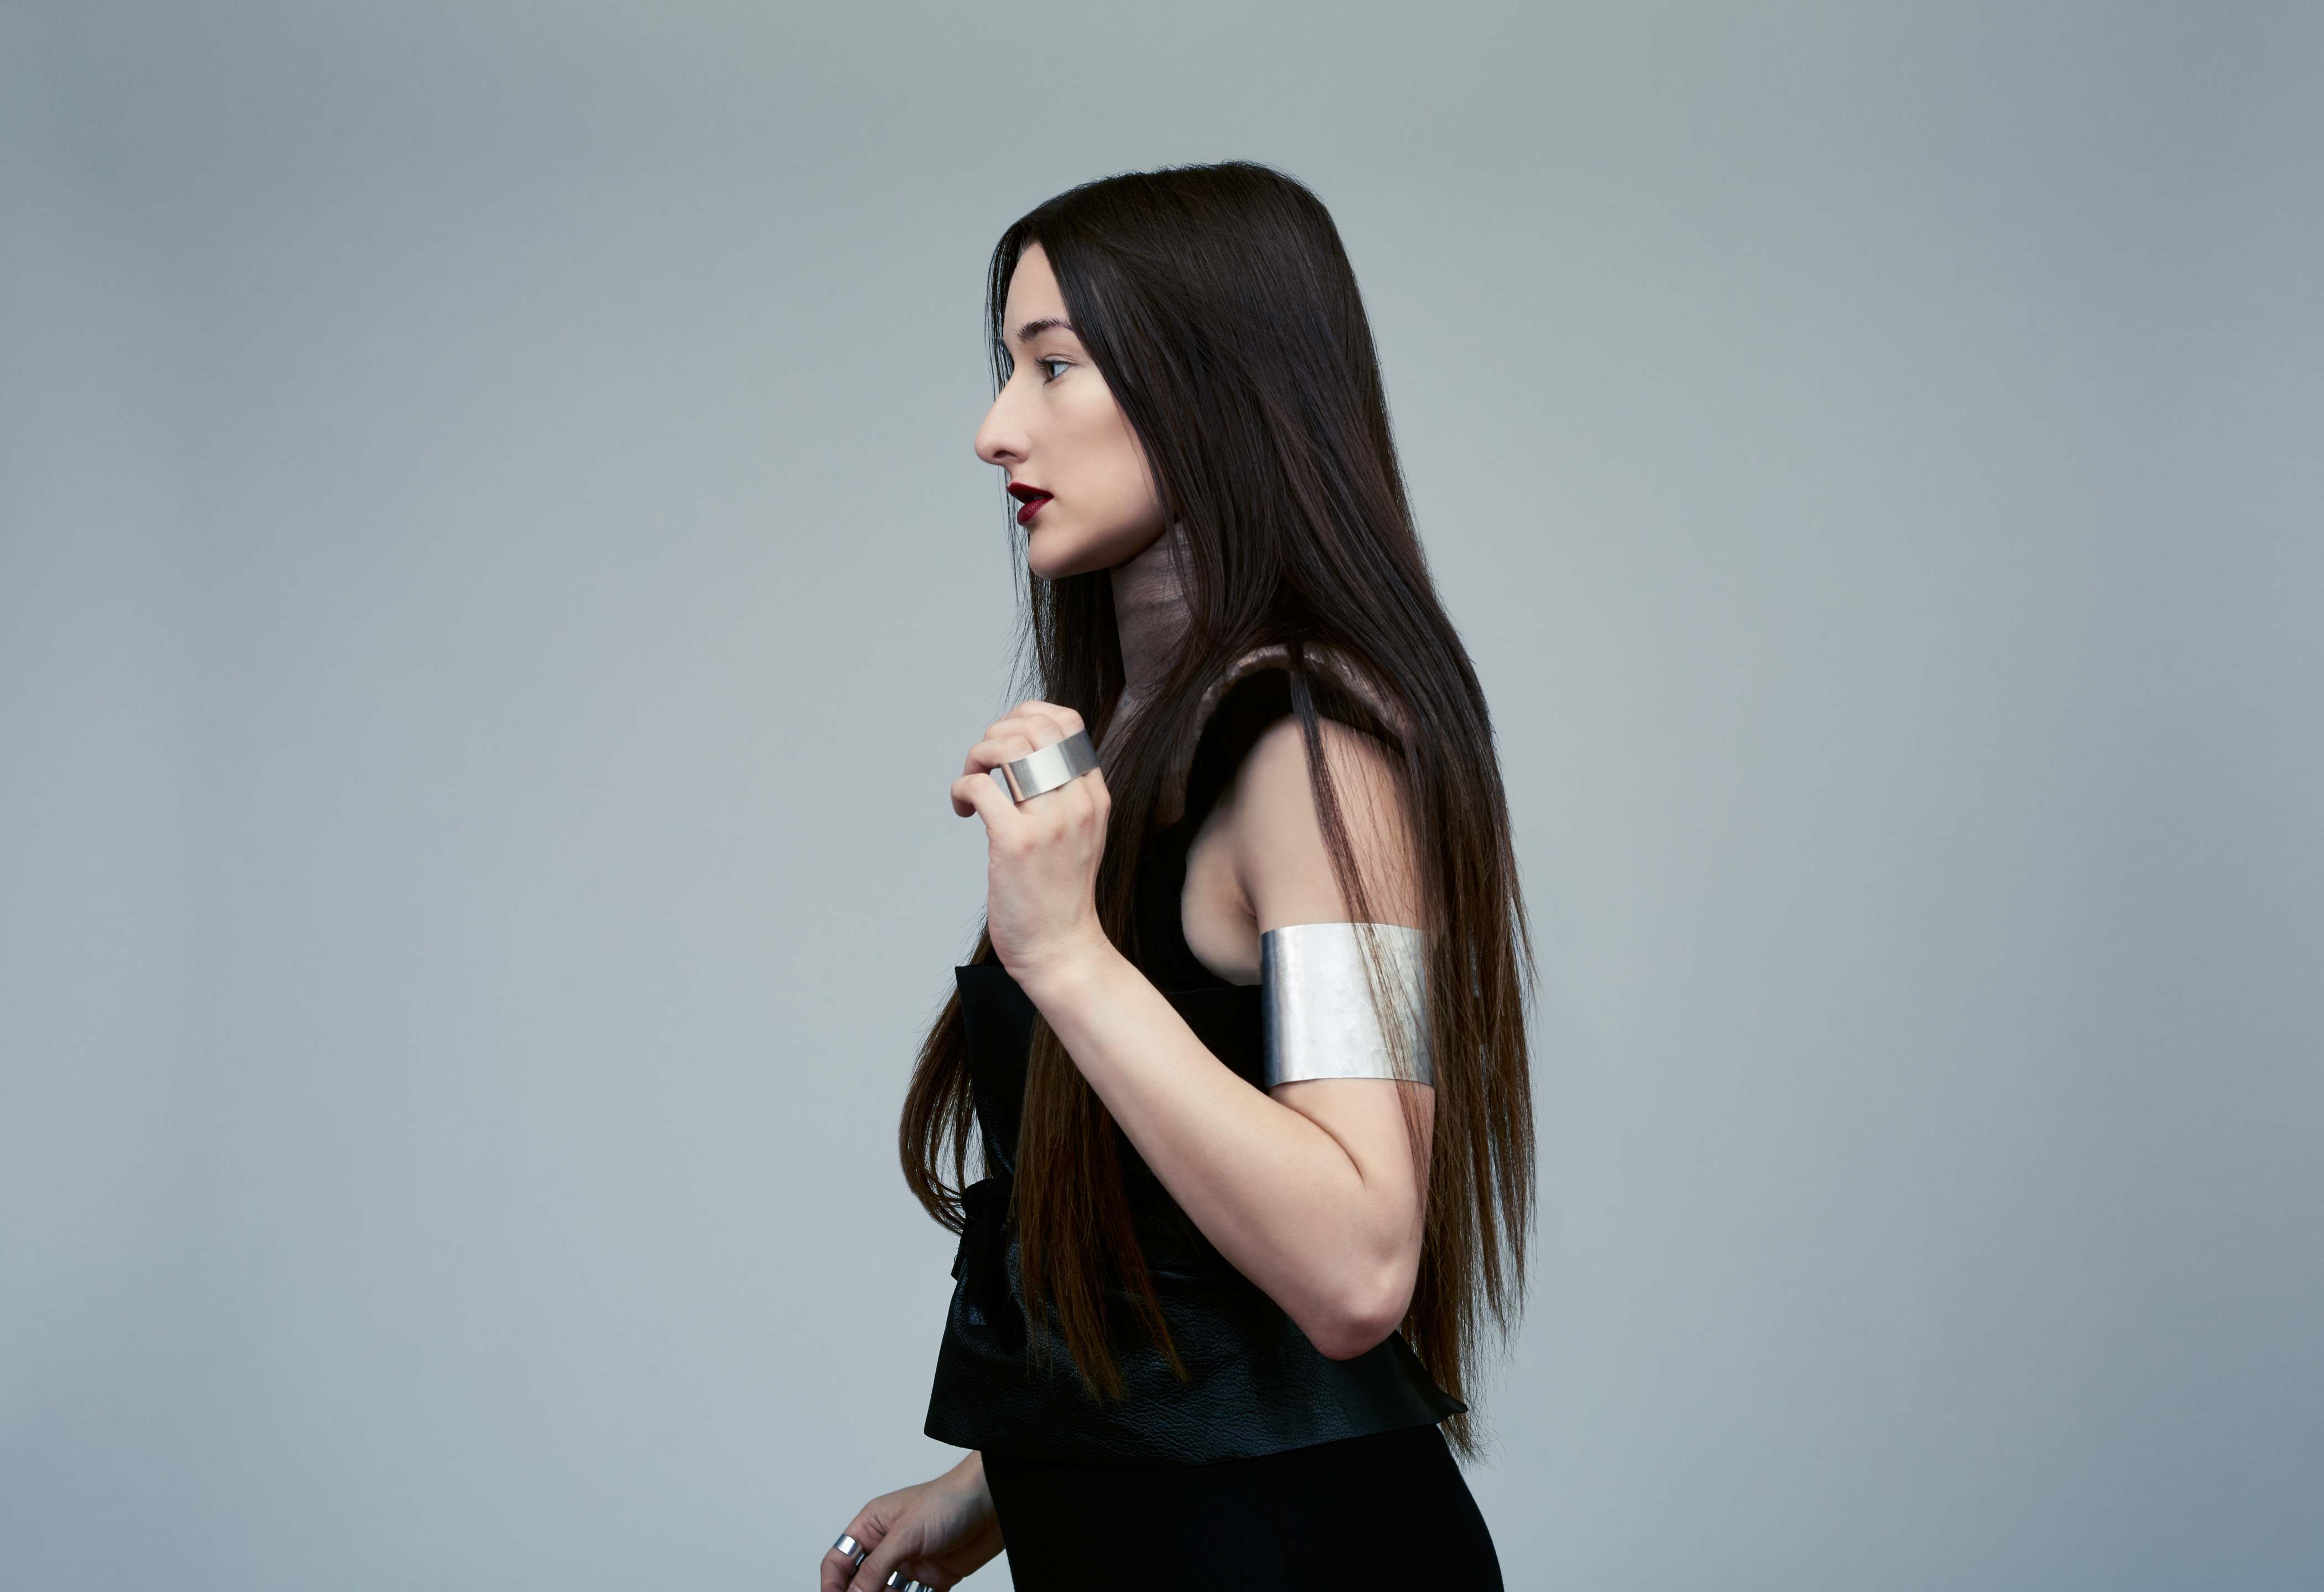 Our interview with Zola Jesus aka Nika Roza Danilova. Her EP 'Nail' was recently released via Mute Records, and continues her tour on 9 21 IN Madison, WI.